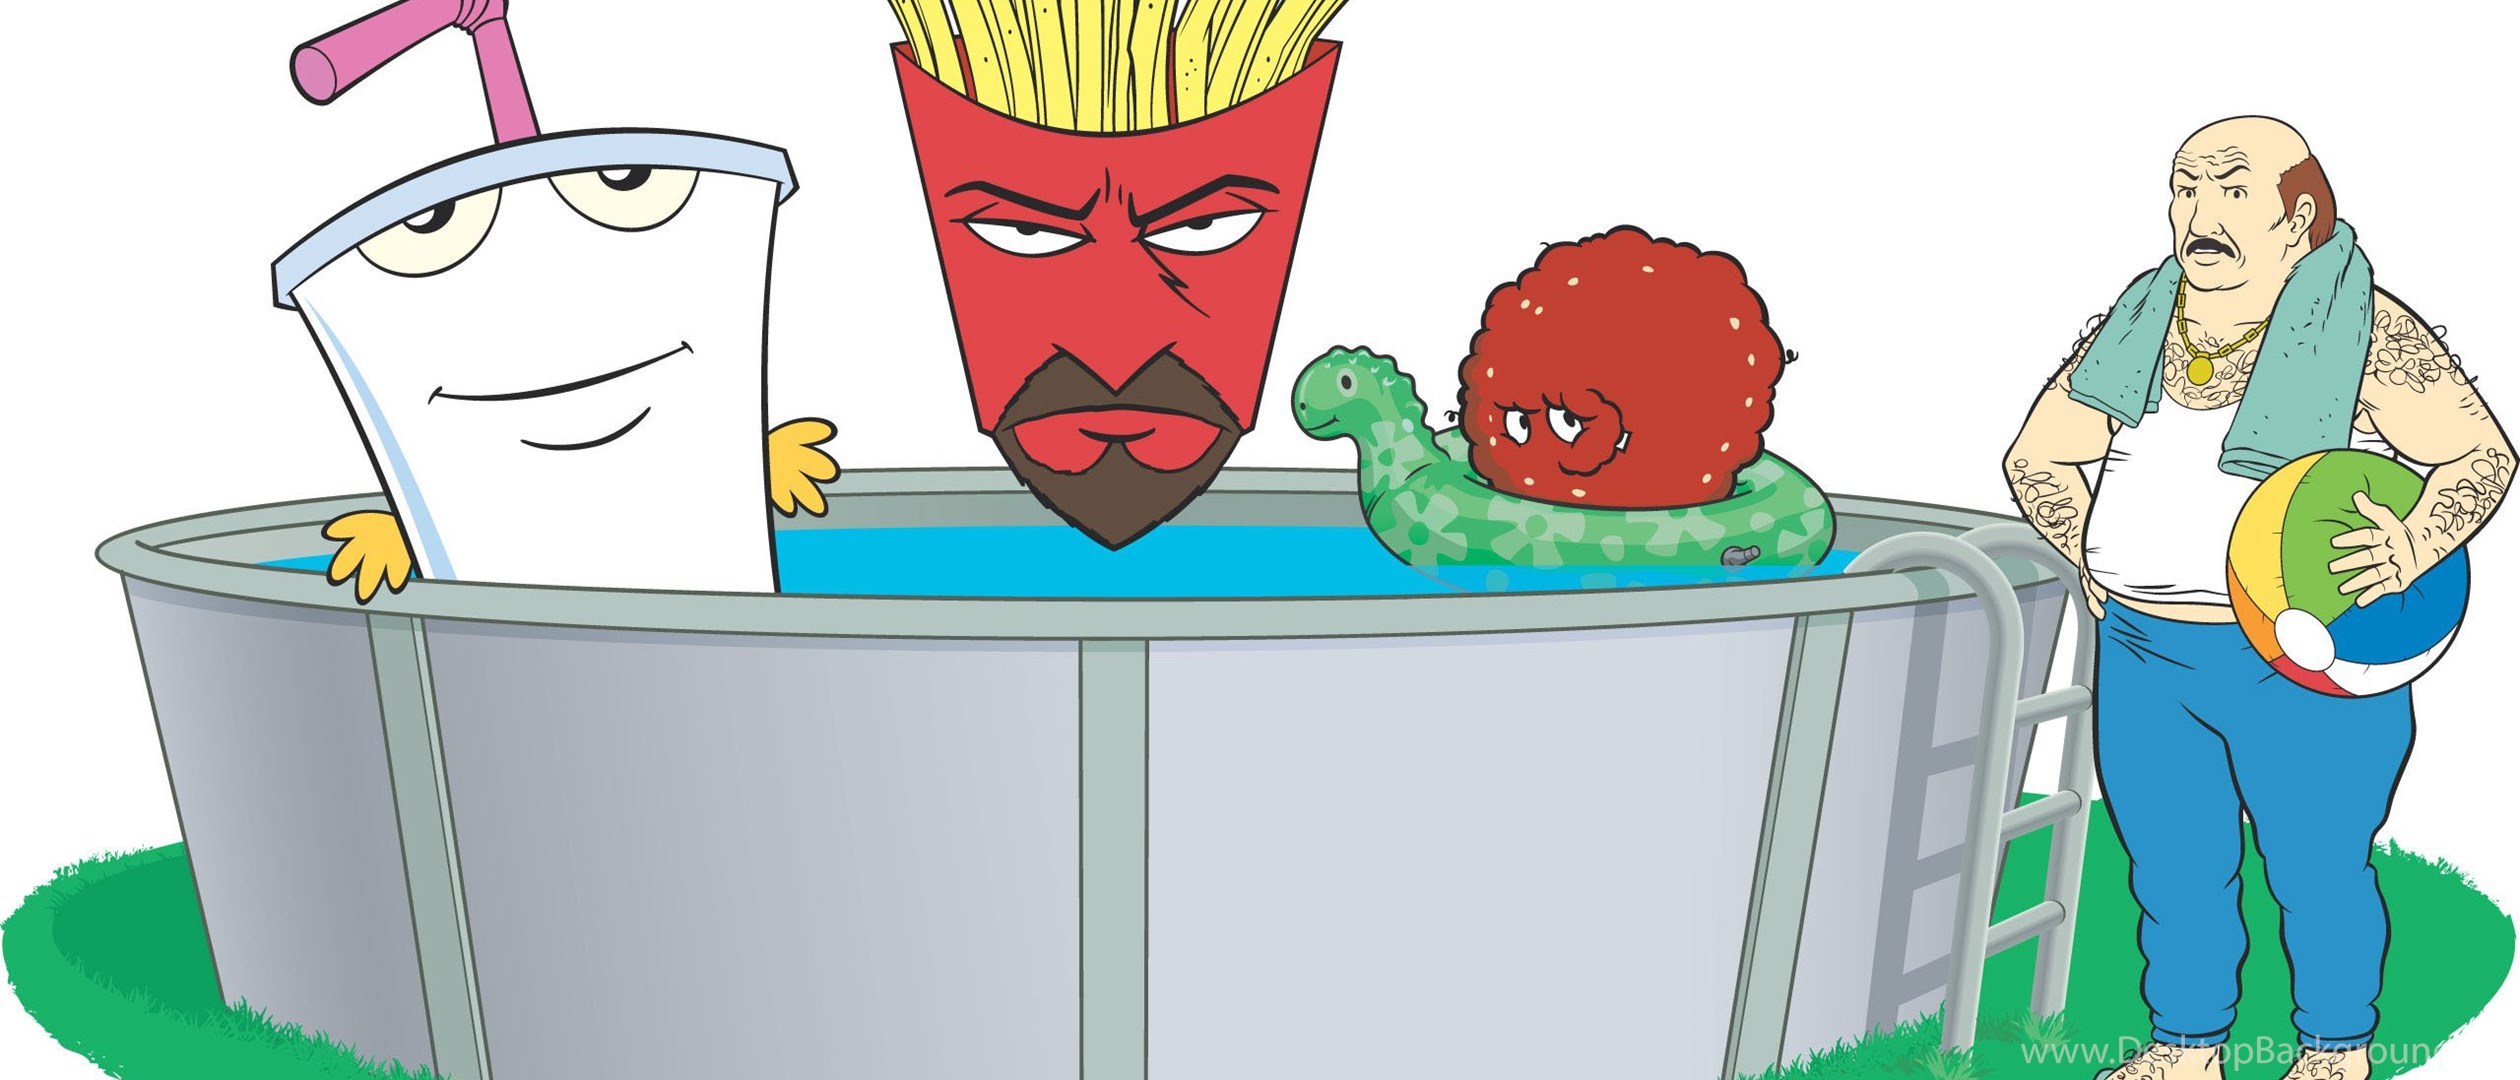 Download Next Up Movies: AQUA TEEN HUNGER FORCE COLON MOVIE FILM FOR ... 